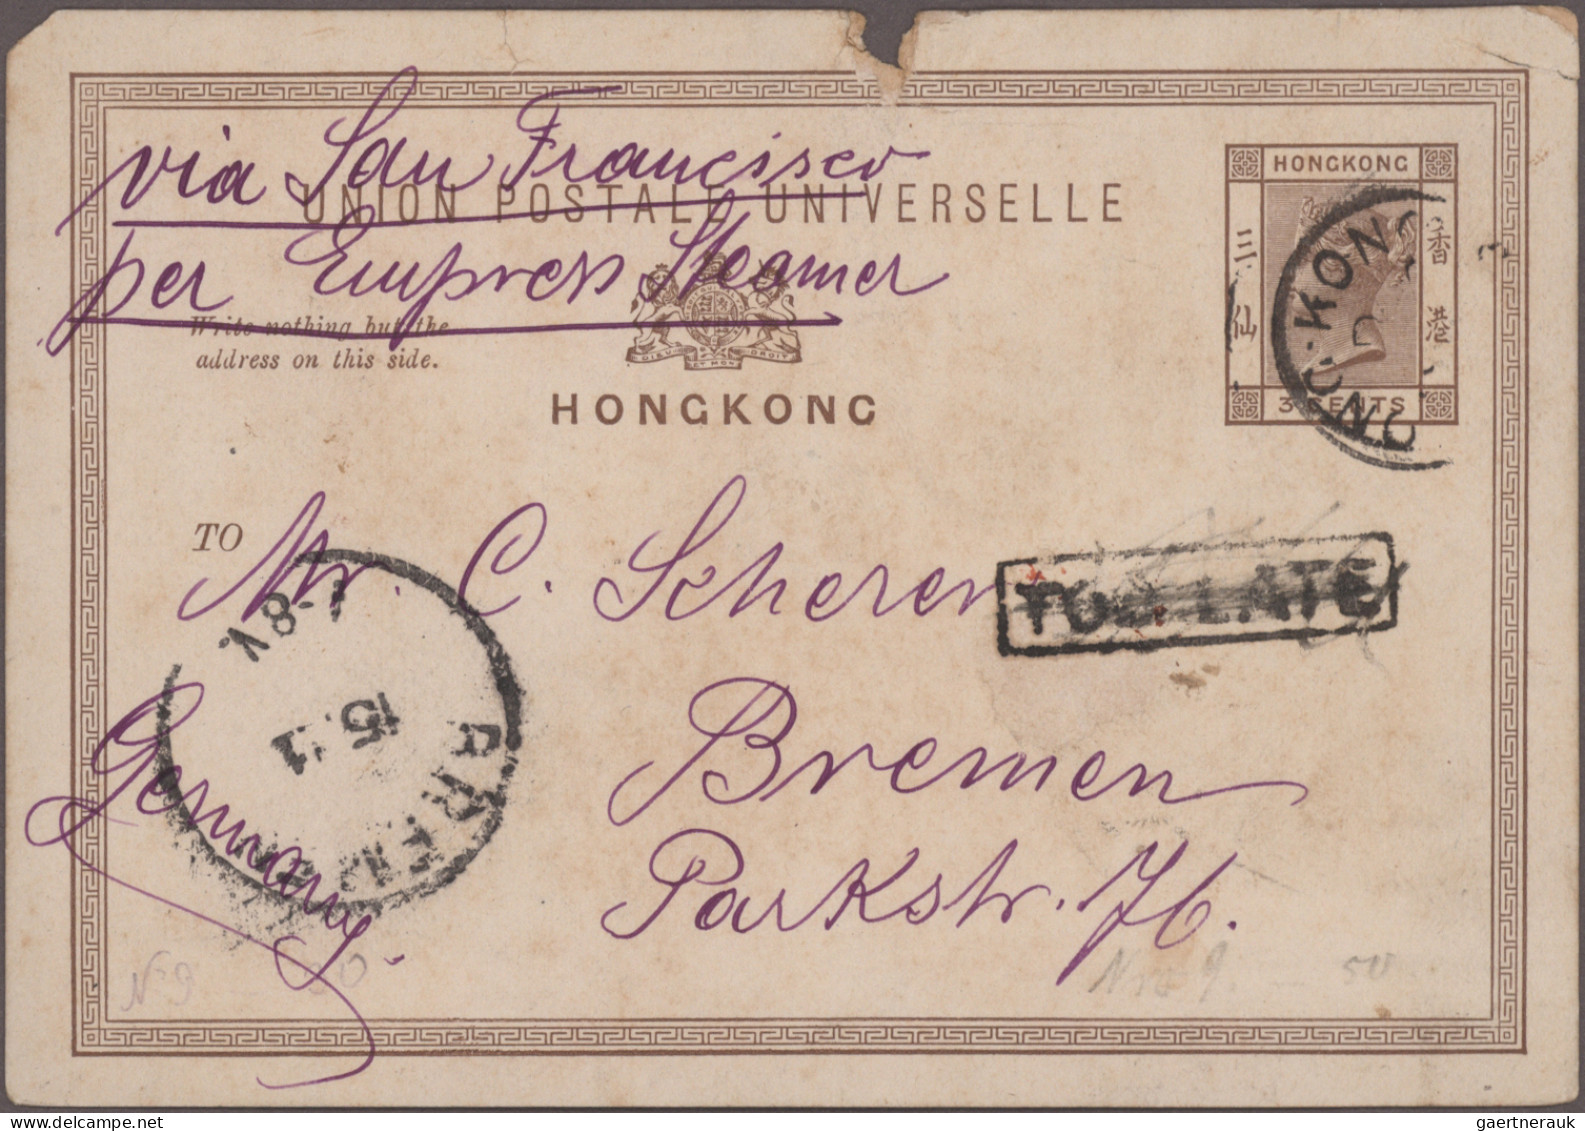 Hong Kong: 1863/1931, definitives QV-KGV, mostly used on stockcards and in stock